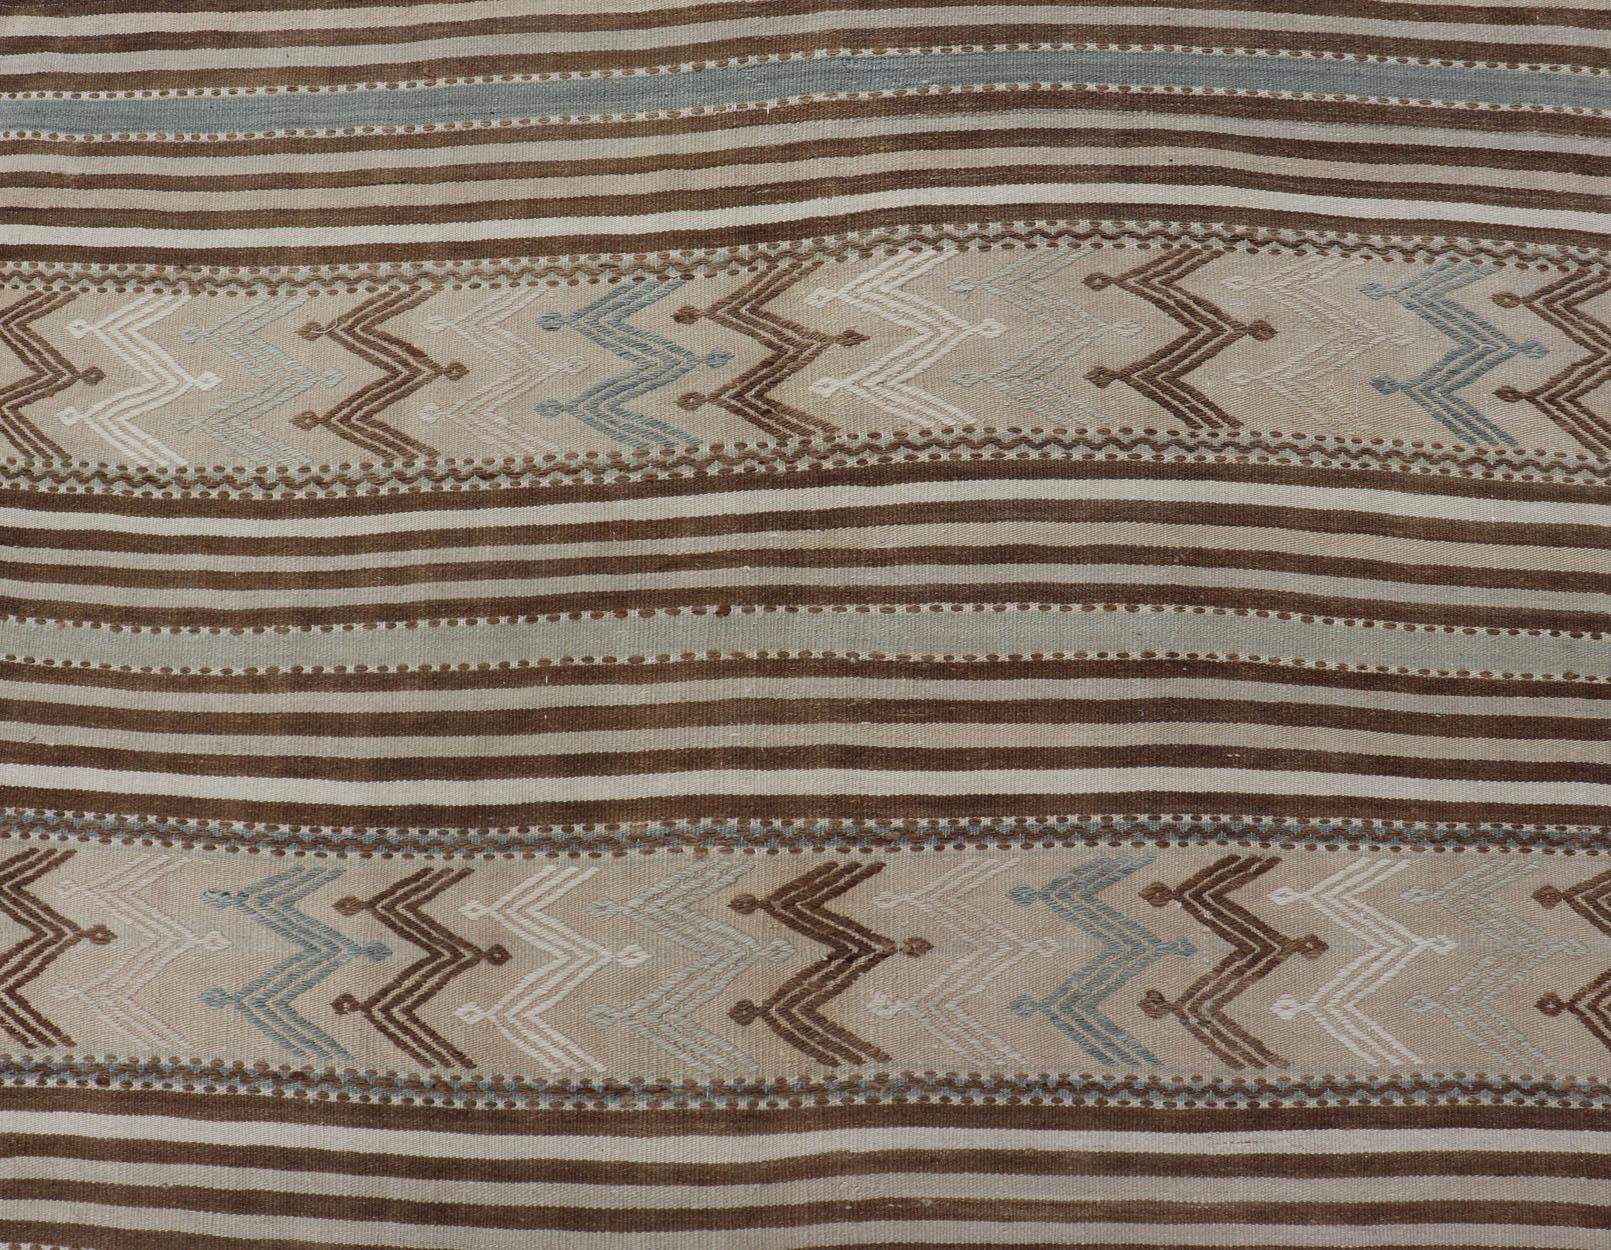 Turkish Hand Woven Flat-Weave Embroidered Kilim in Taupe, Brown, and Lt. Blue. Keivan Woven Arts / rug EN-179493, country of origin / type: Turkey / Kilim, circa 1950

Measures: 4'6 x 8'4 

This vintage flat-woven Embroidered kilim rug features